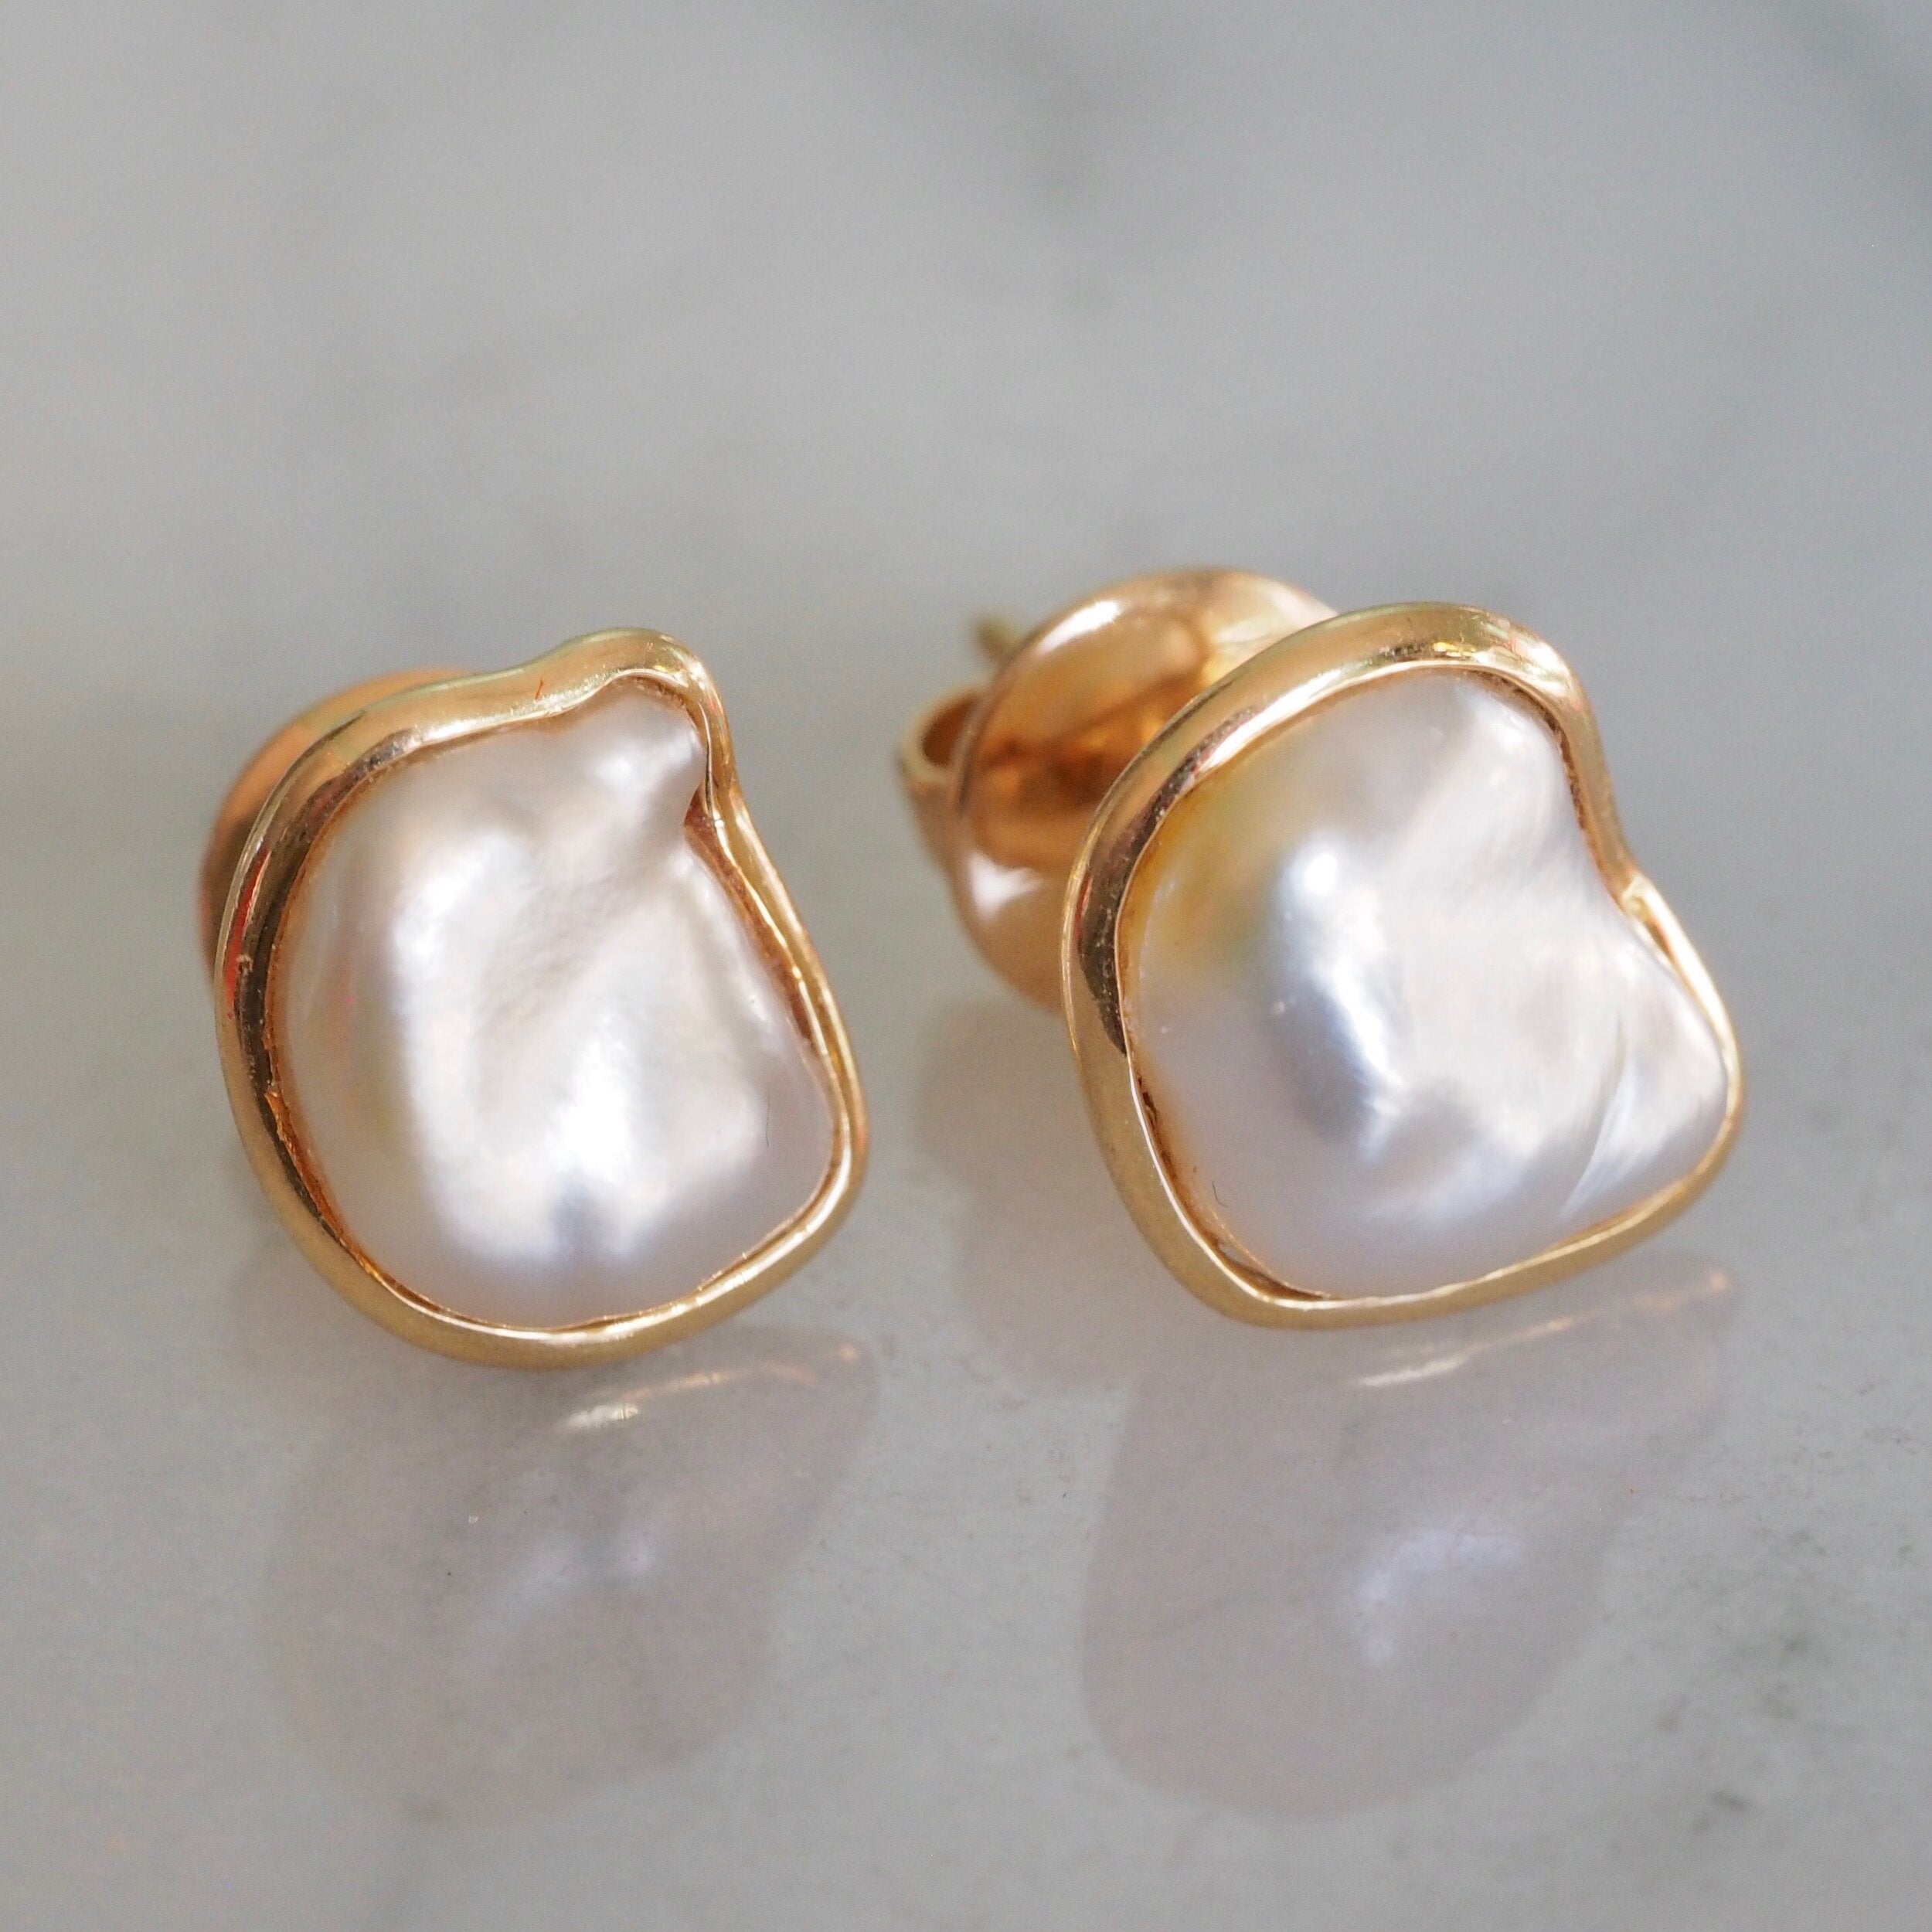 Baroque Pearl and 18k Gold Earrings